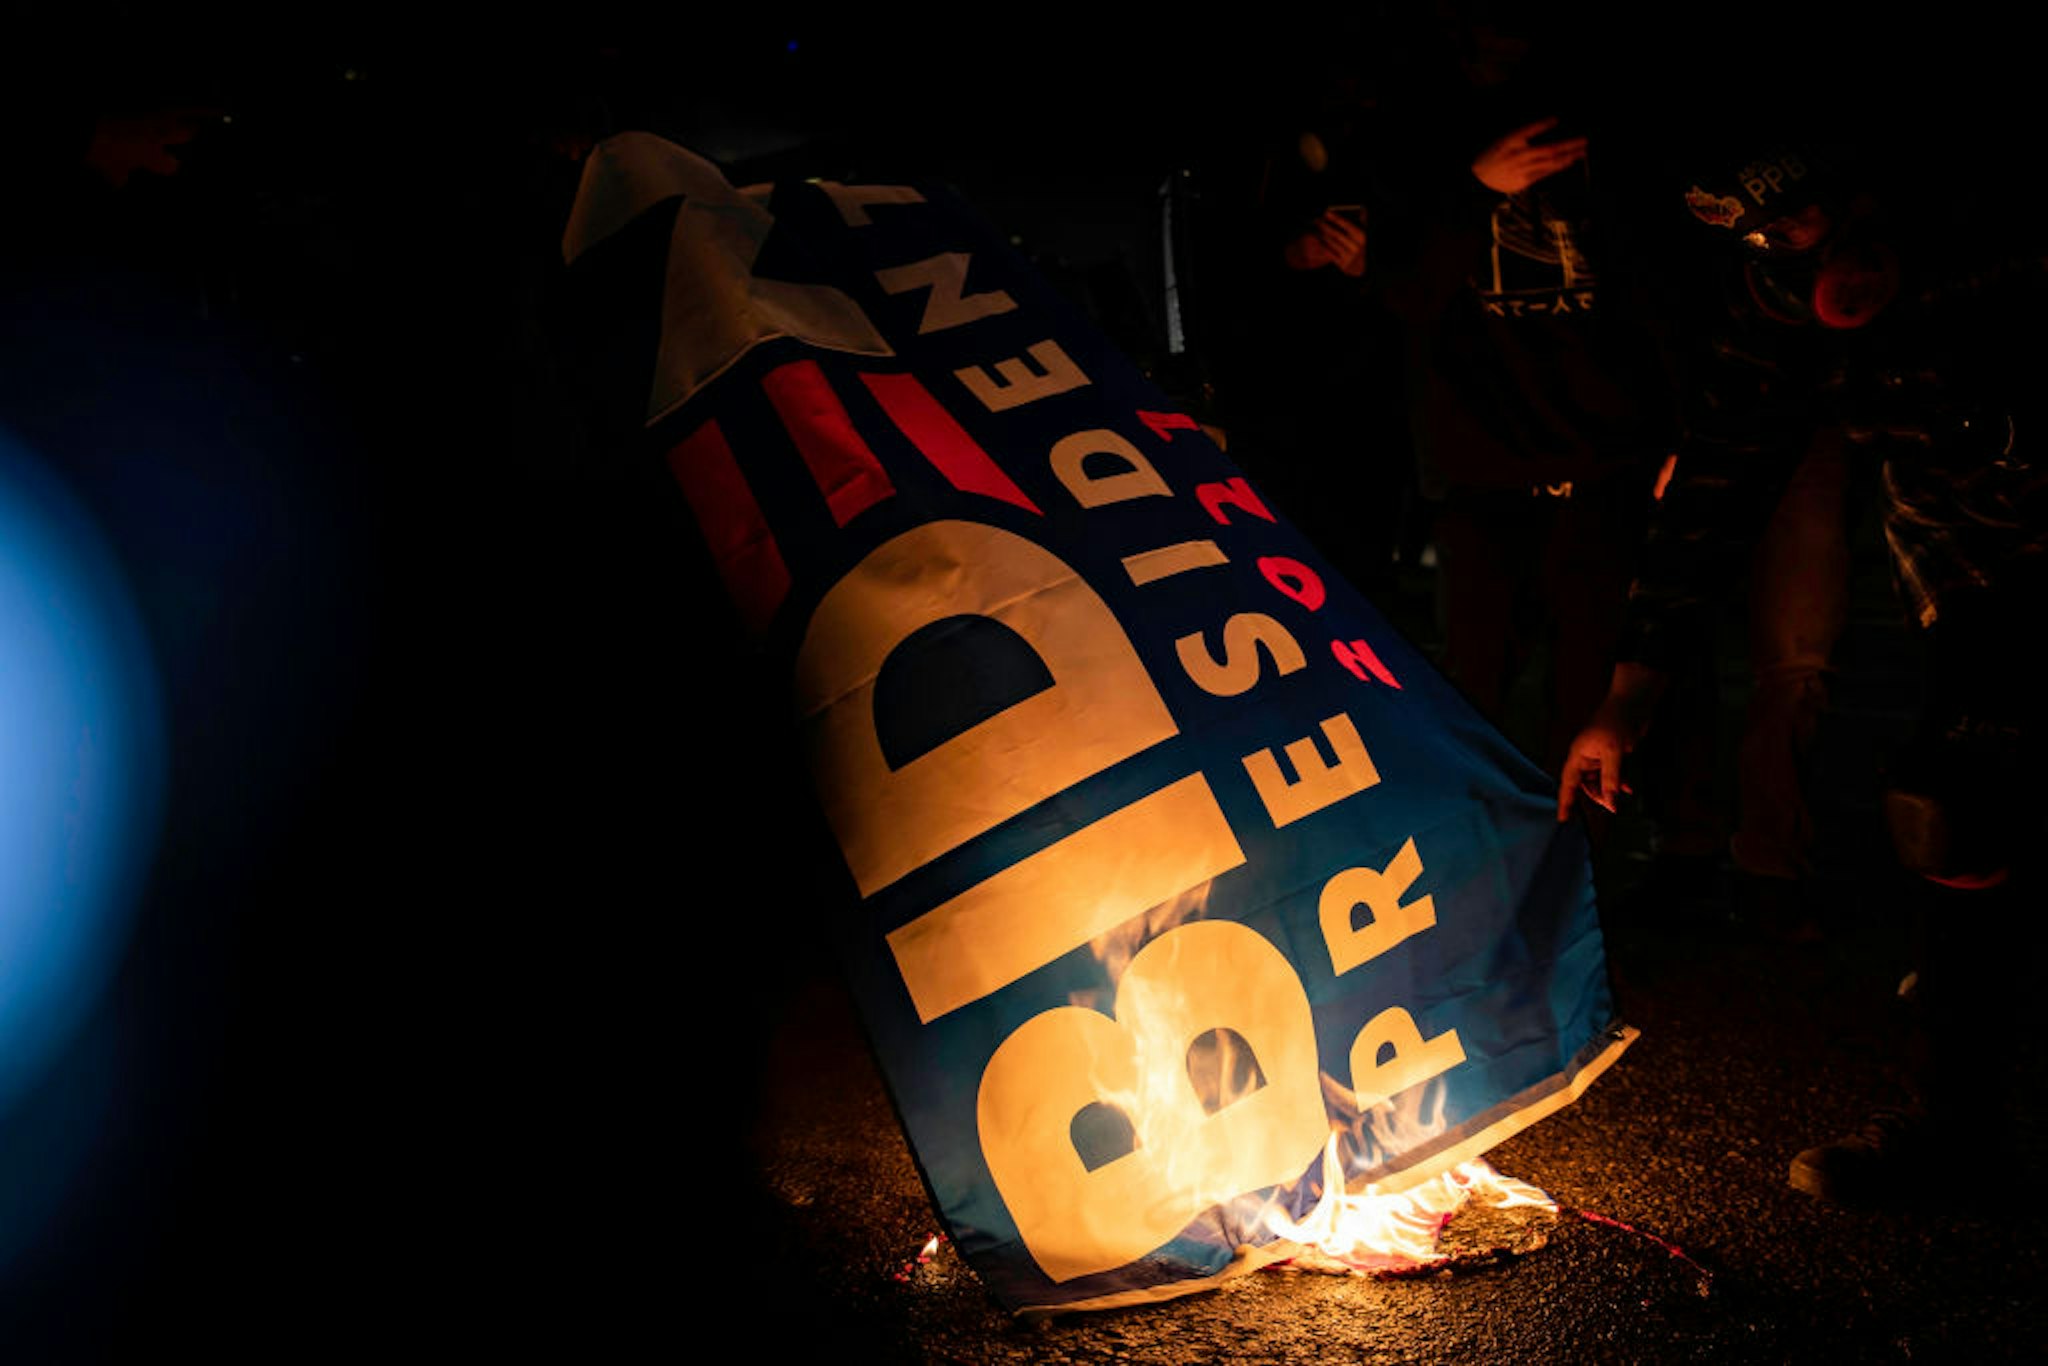 PORTLAND, OR, UNITED STATES - JANUARY 20: Protesters burn a Biden for President flag outside of the Federal Immigration and Customs Enforcement [ICE] building in Portland, Oregon on January 20, 2021. (Photo by Maranie R. Staab for The Washington Post via Getty Images)